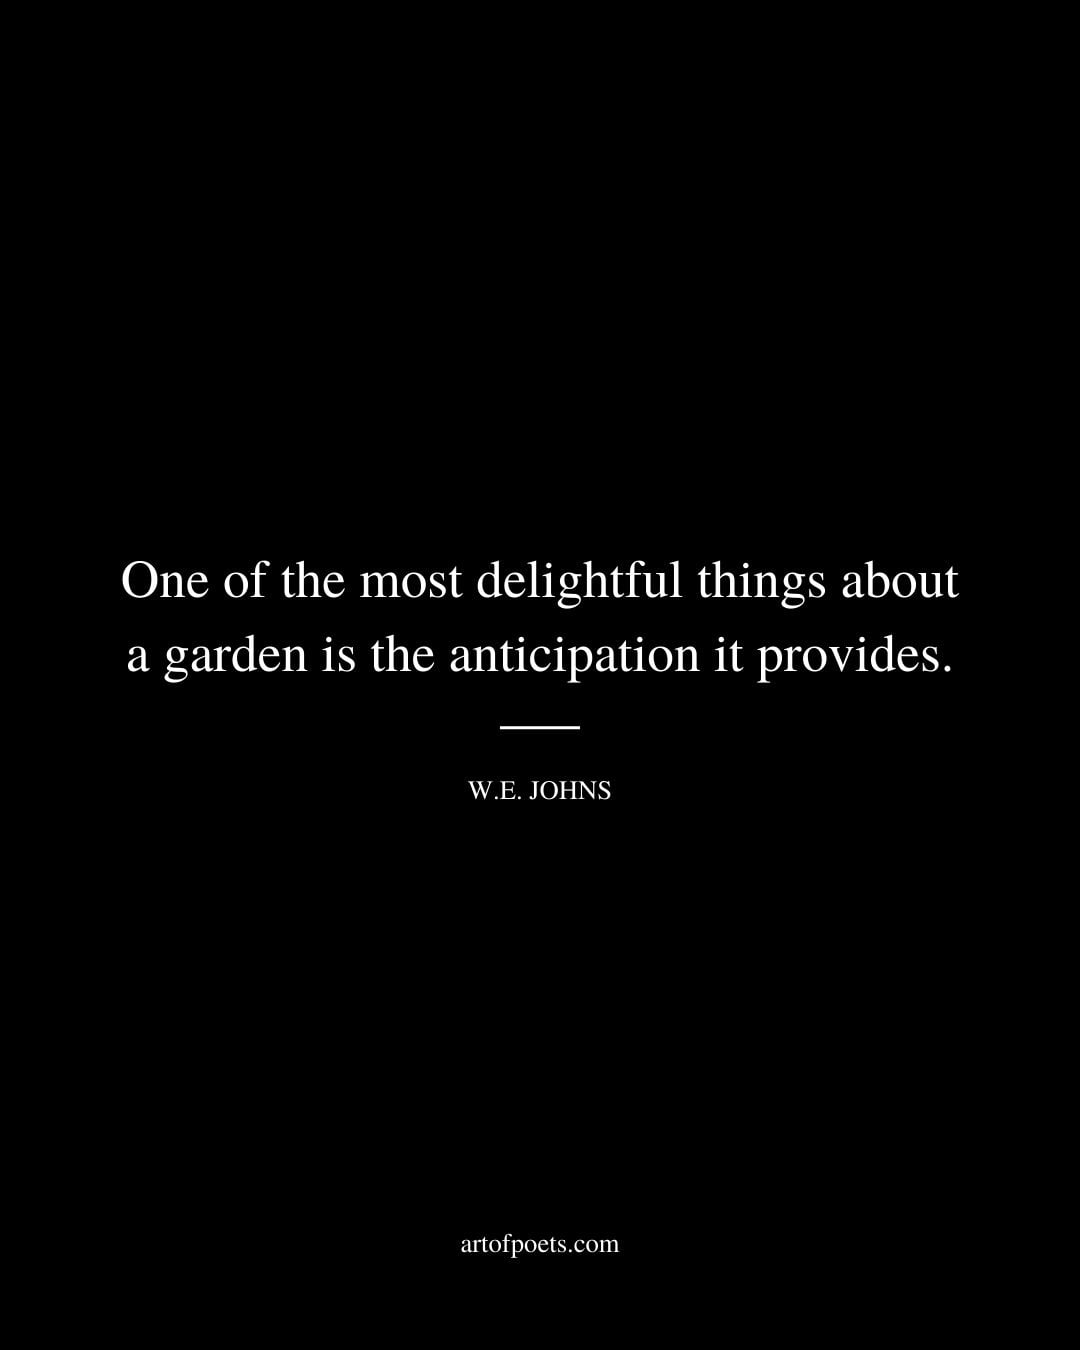 One of the most delightful things about a garden is the anticipation it provides. – W.E. Johns